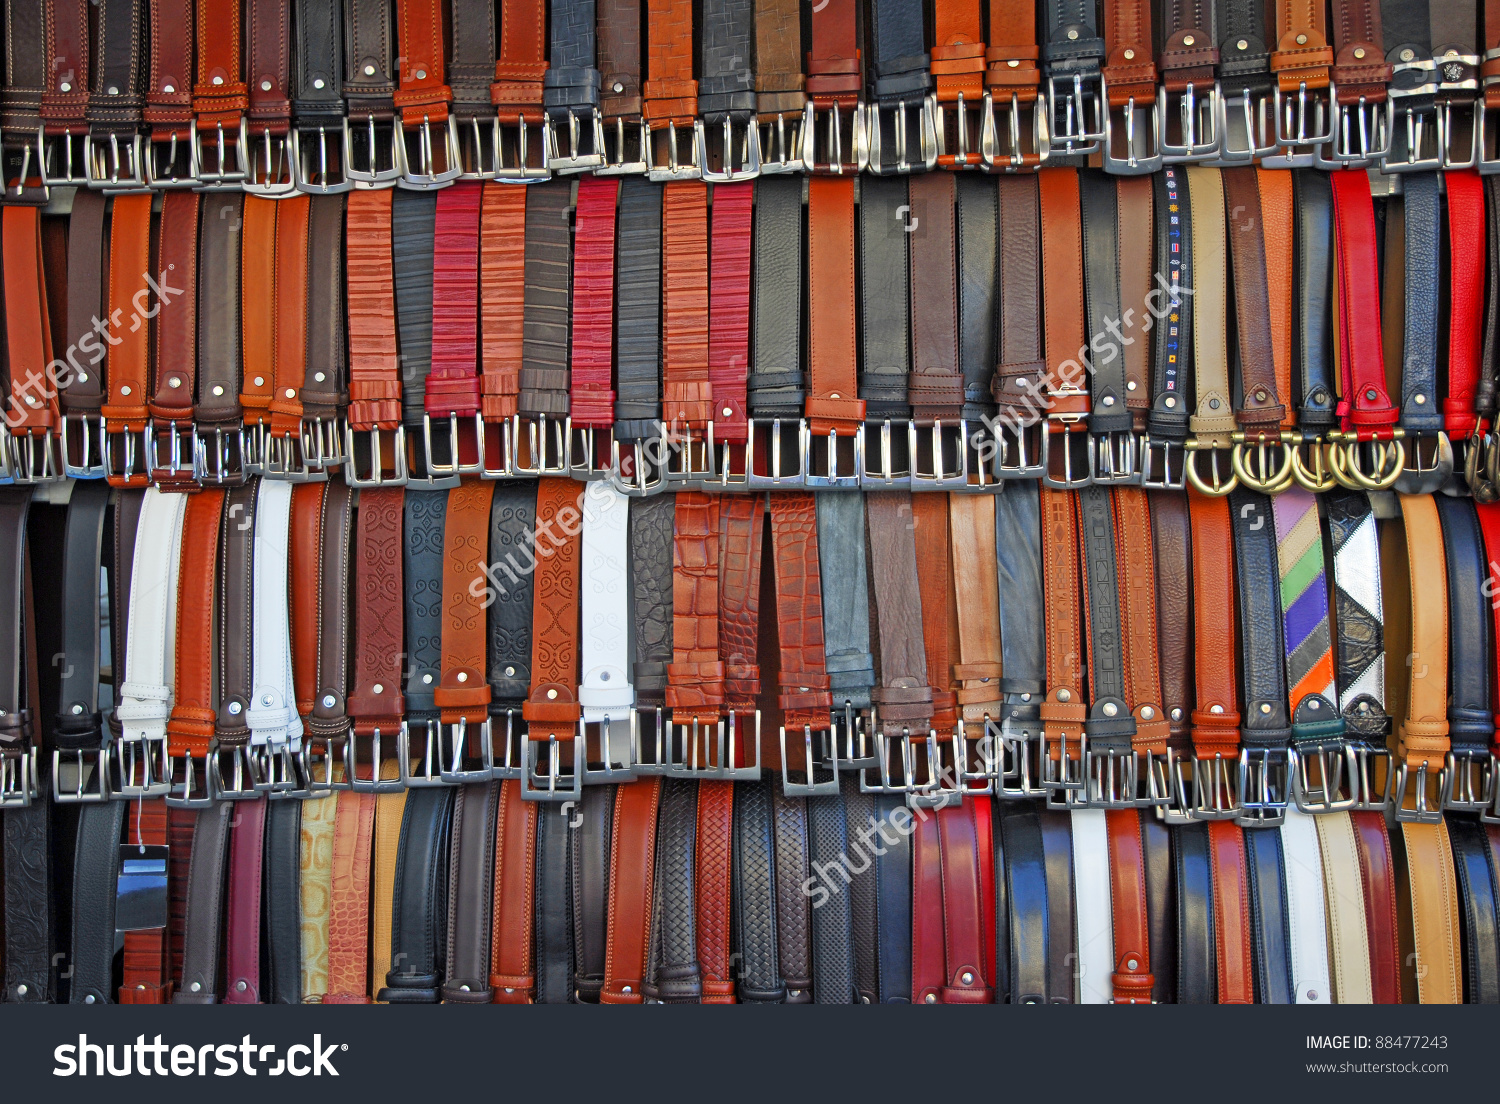 Florence Market Belt Collection Stock Photo 88477243.